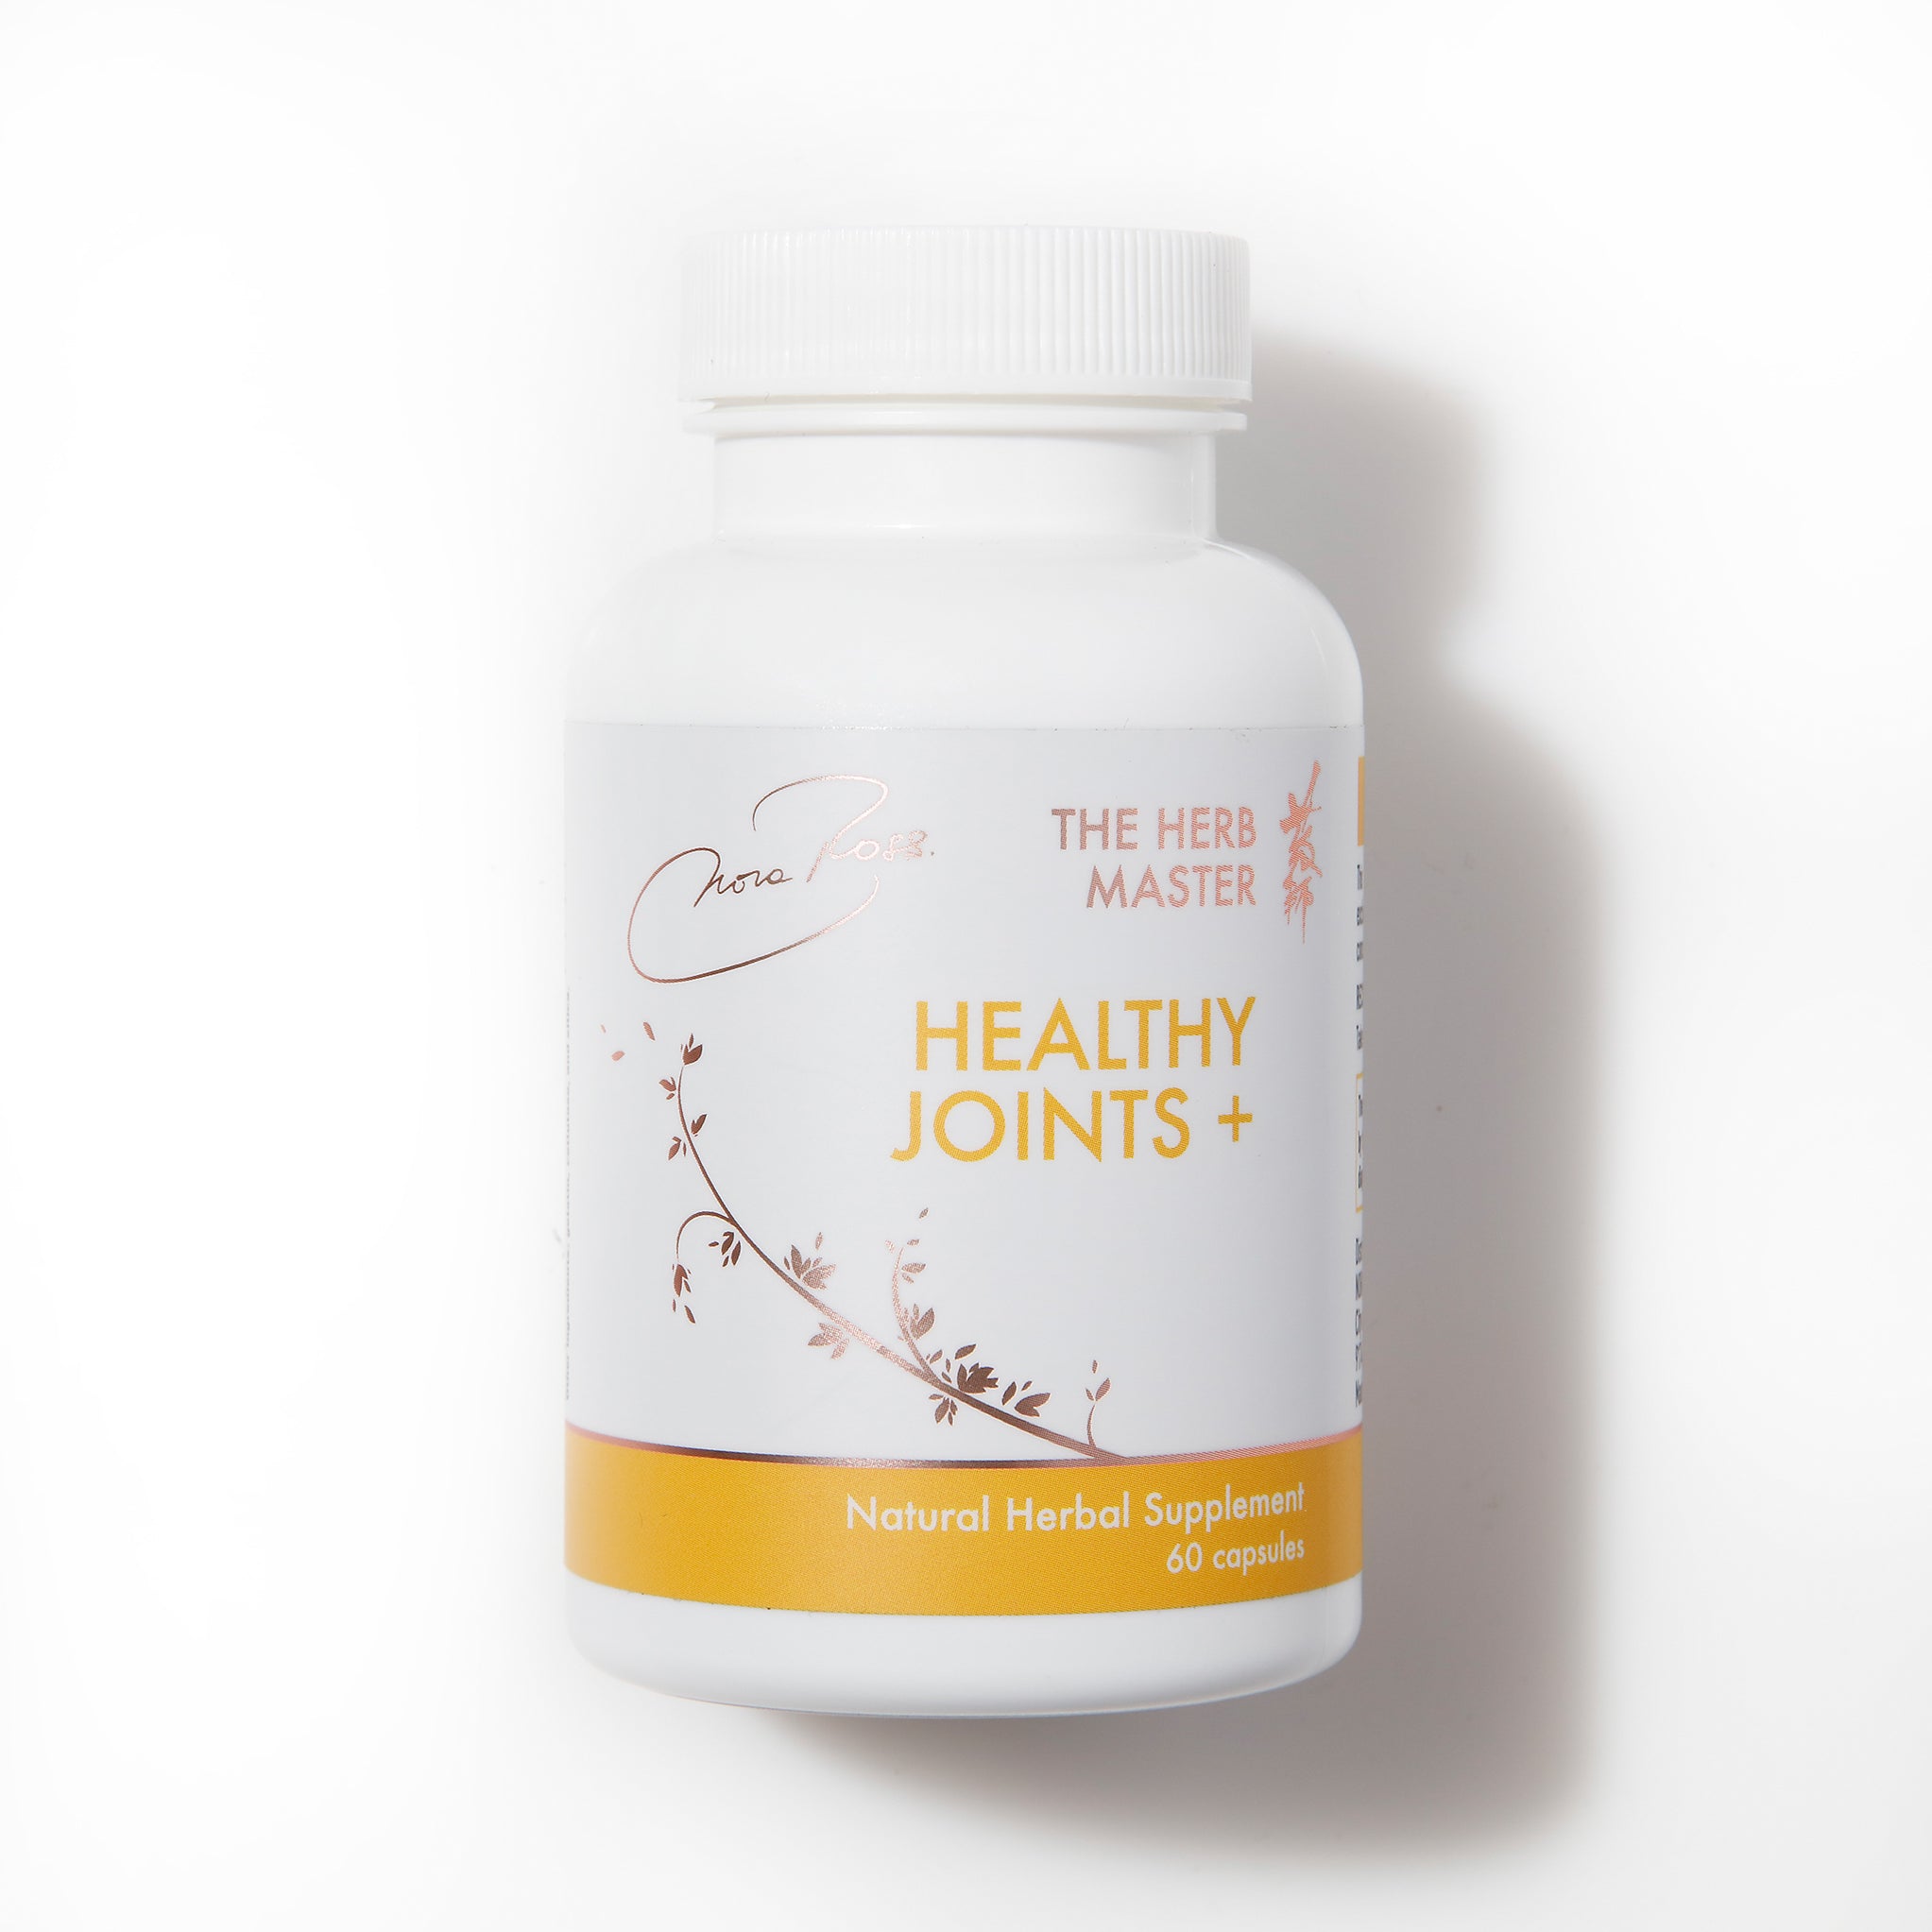 Young & Healthy Supplements Bundle - Repair Cartilage, Boost Joint Mobility & Increase Joint Flexibility